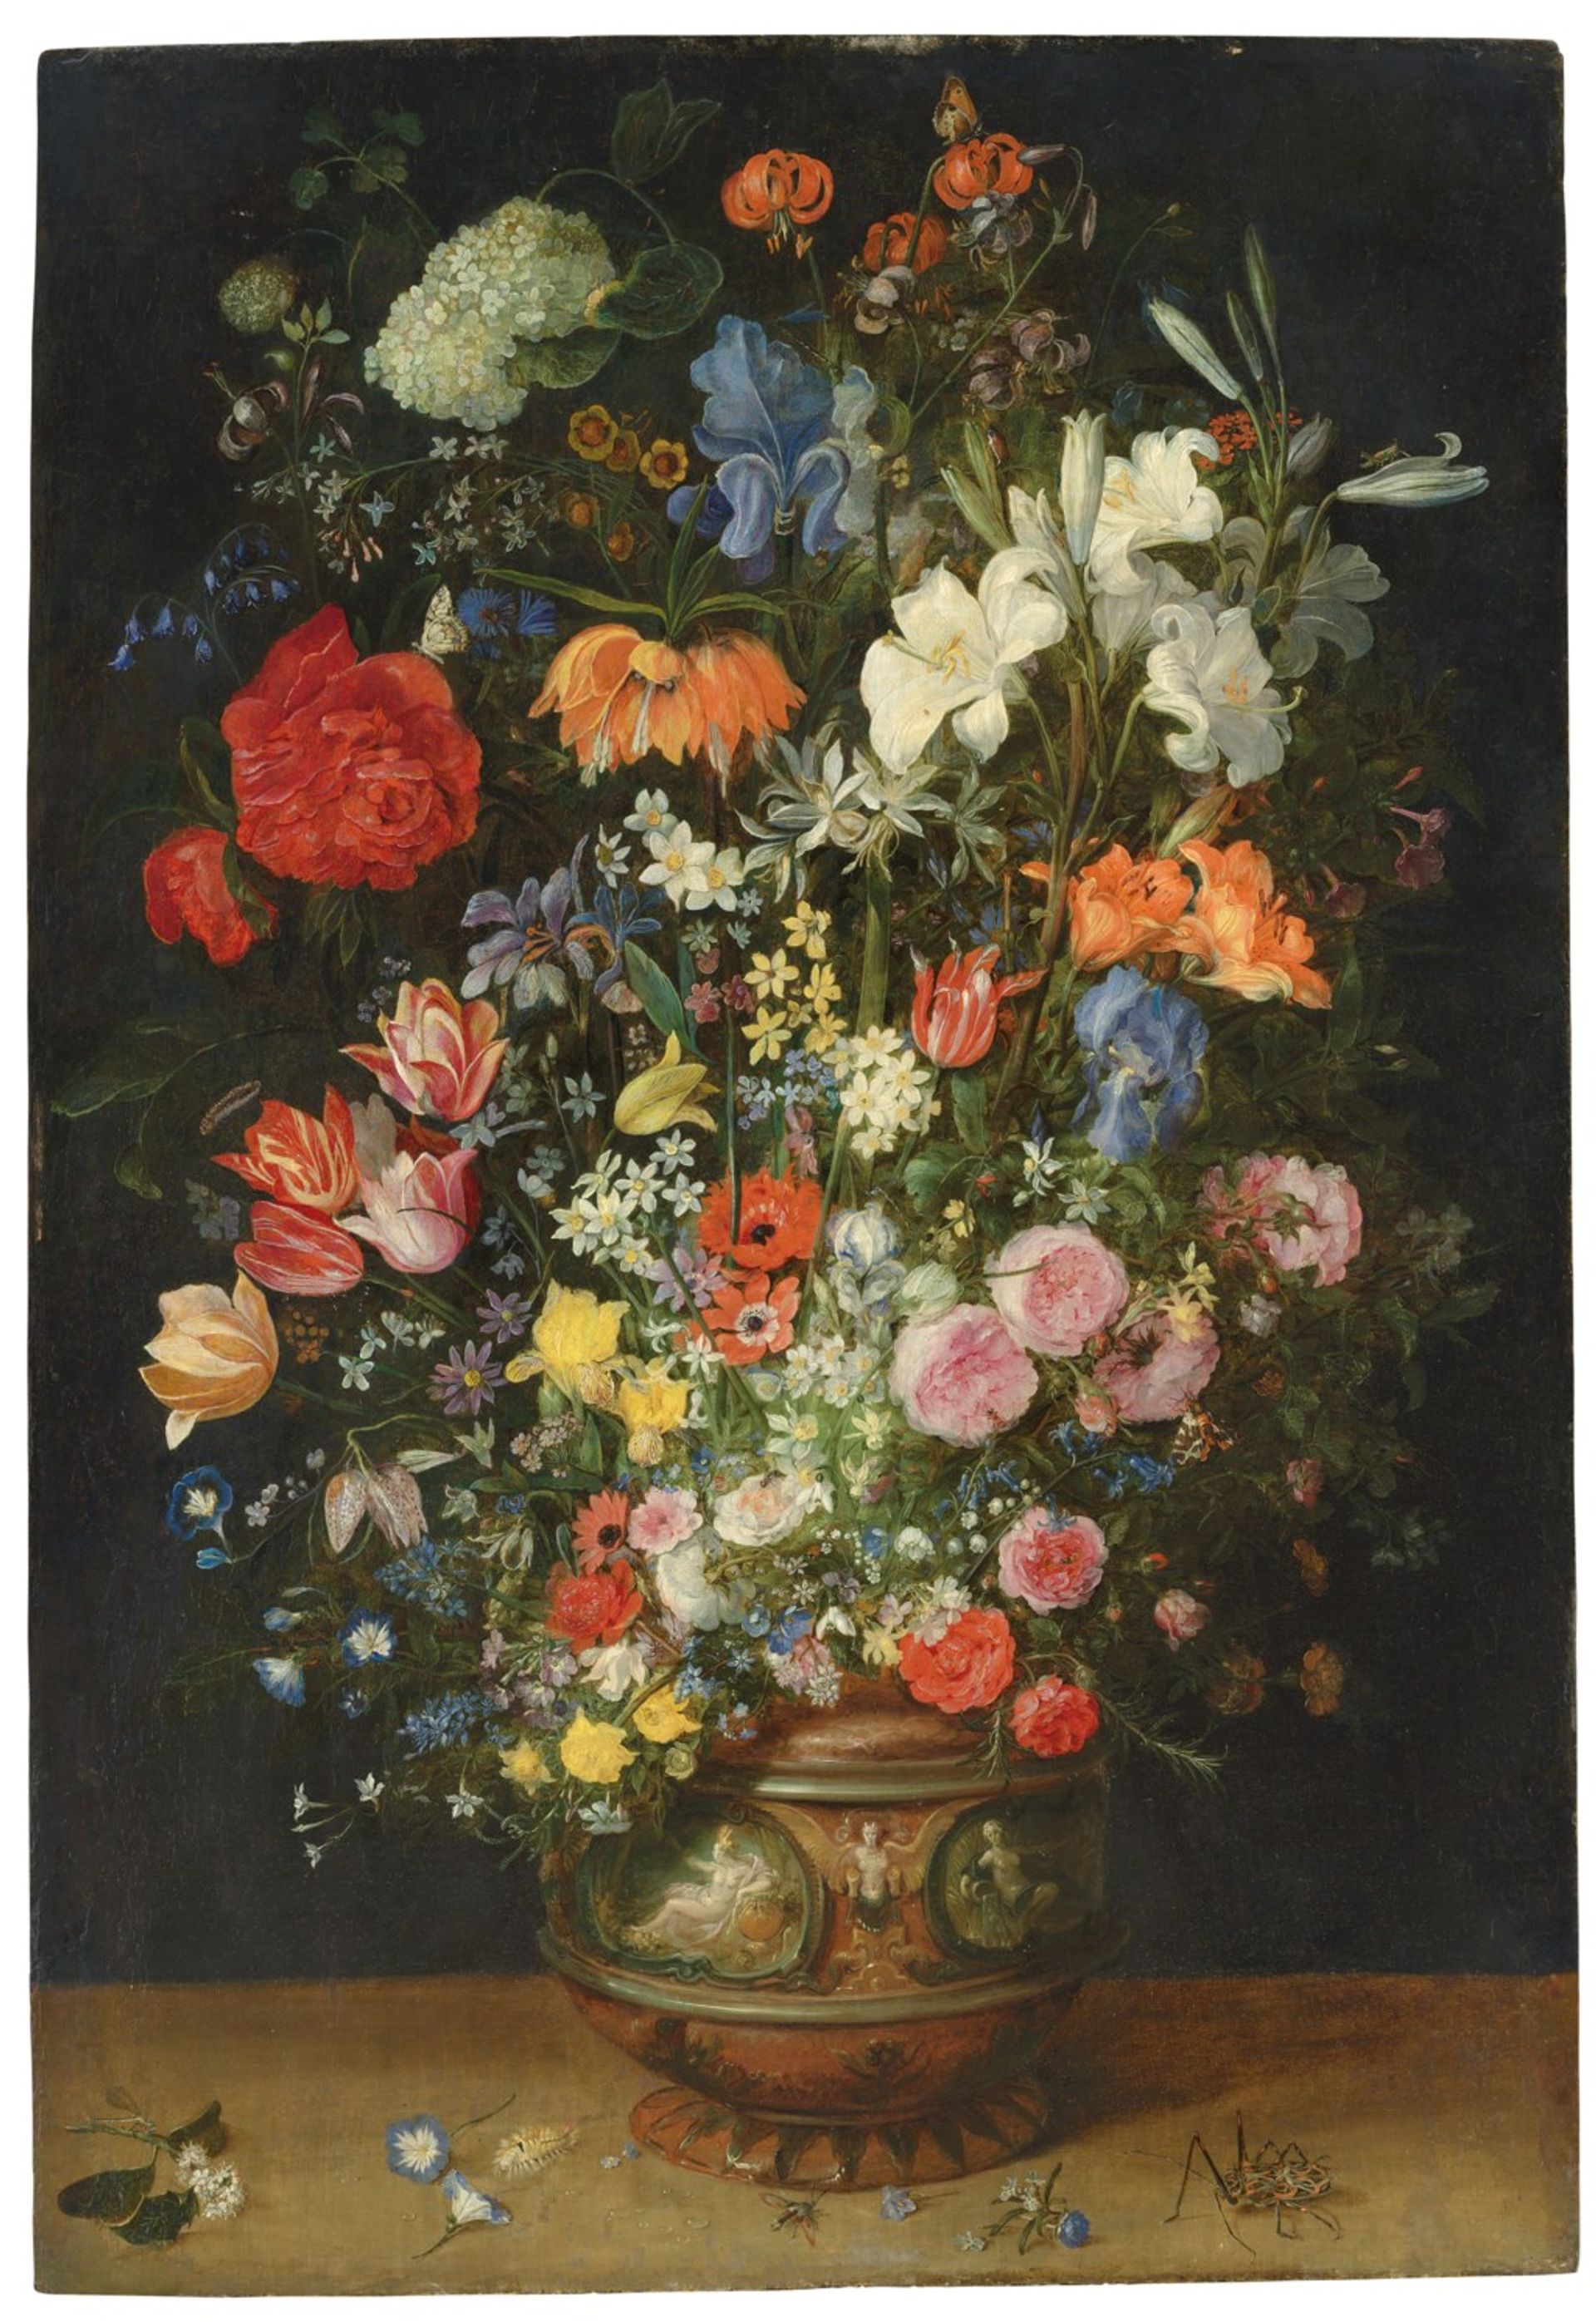 Jan Breughel the Elder's Lilies, tulips, roses and other flowers in an ornamental vase on a ledge, with butterflies and beetles (around 1620) Courtesy of Christie's